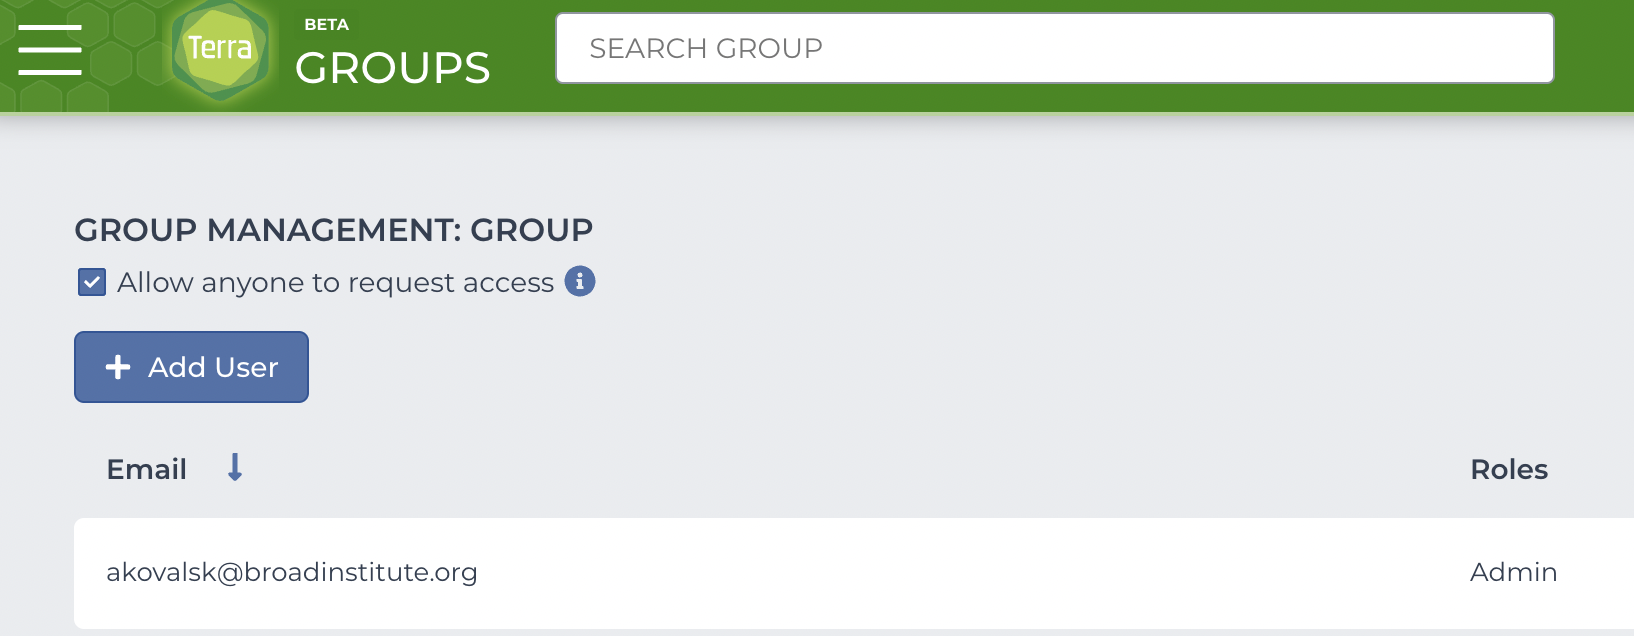 Closeup screenshot of group management page with the option to allow anyone to request access checkbox selected and the blue add user button above. One user email is listed with the role of admin.